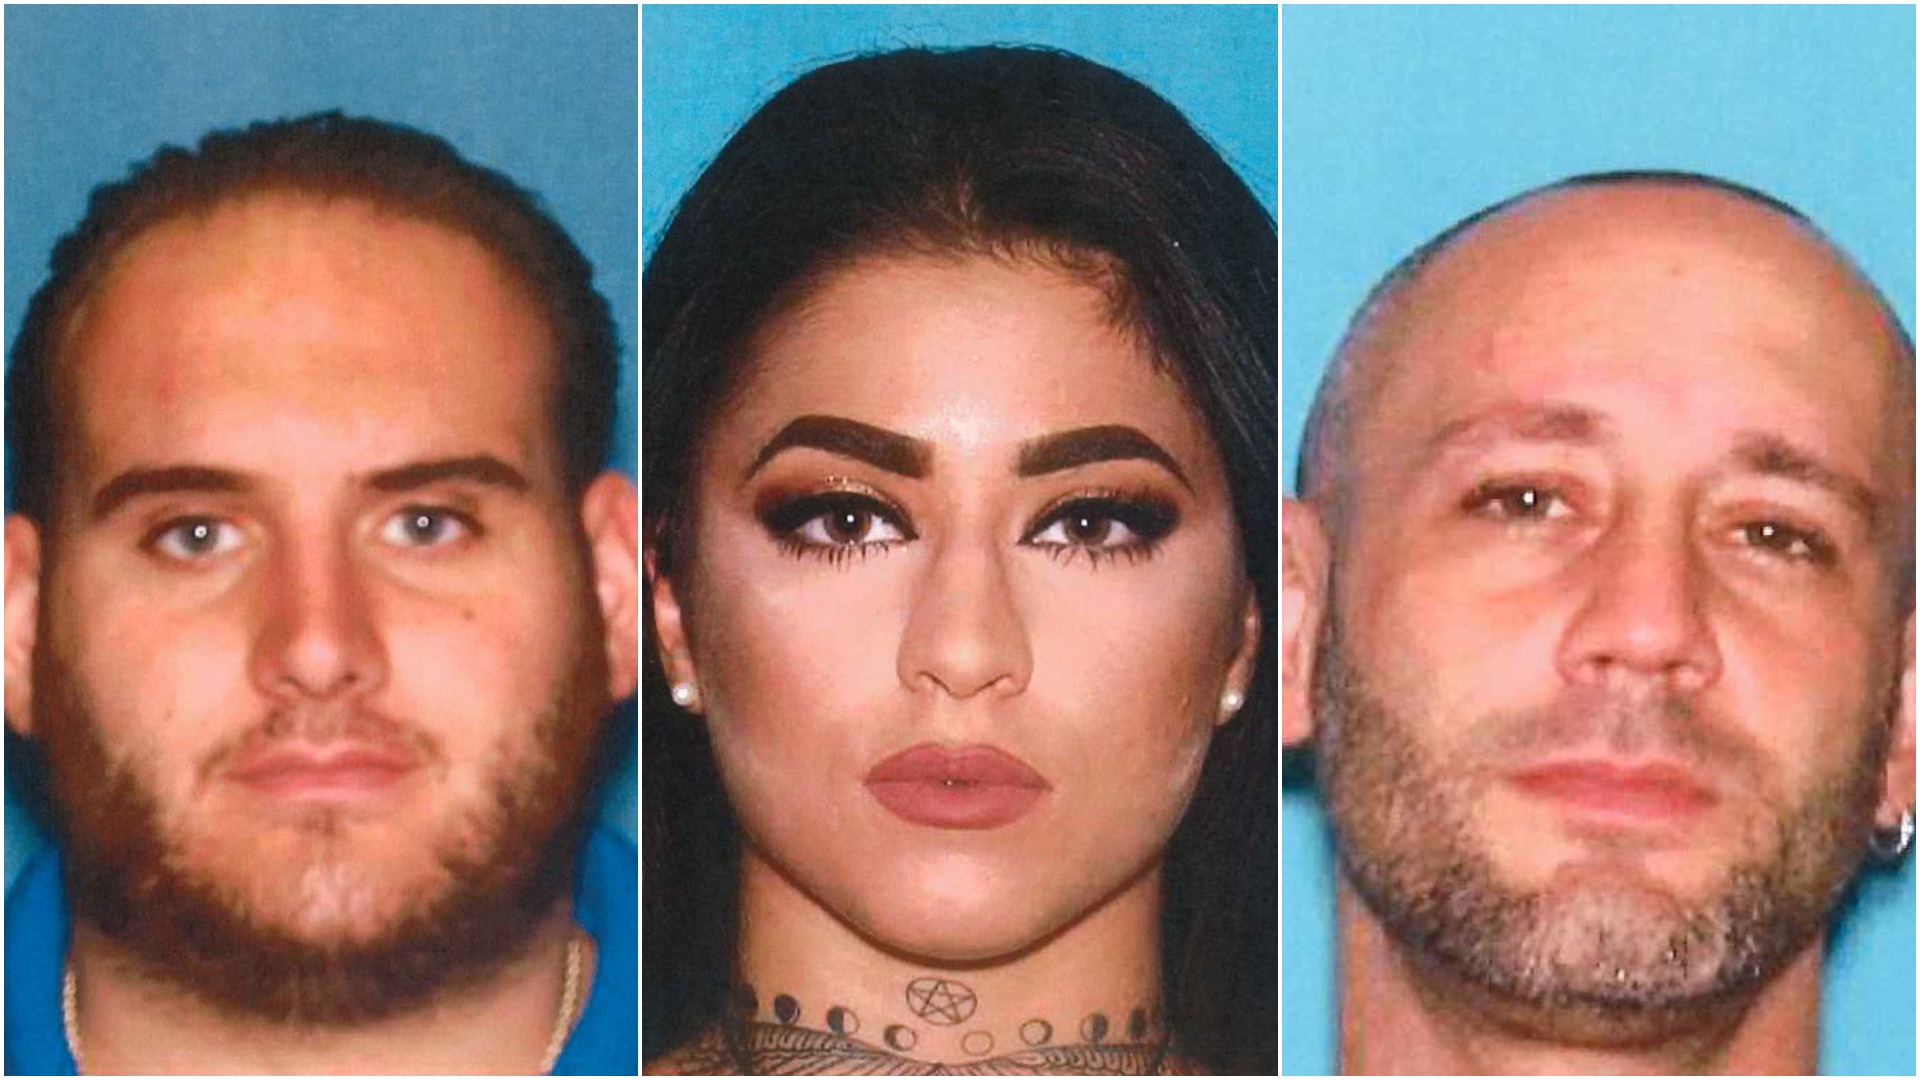 Suspects charged with dealing drugs in Ocean County. (From left: Galli, Humphreys and Vella.)